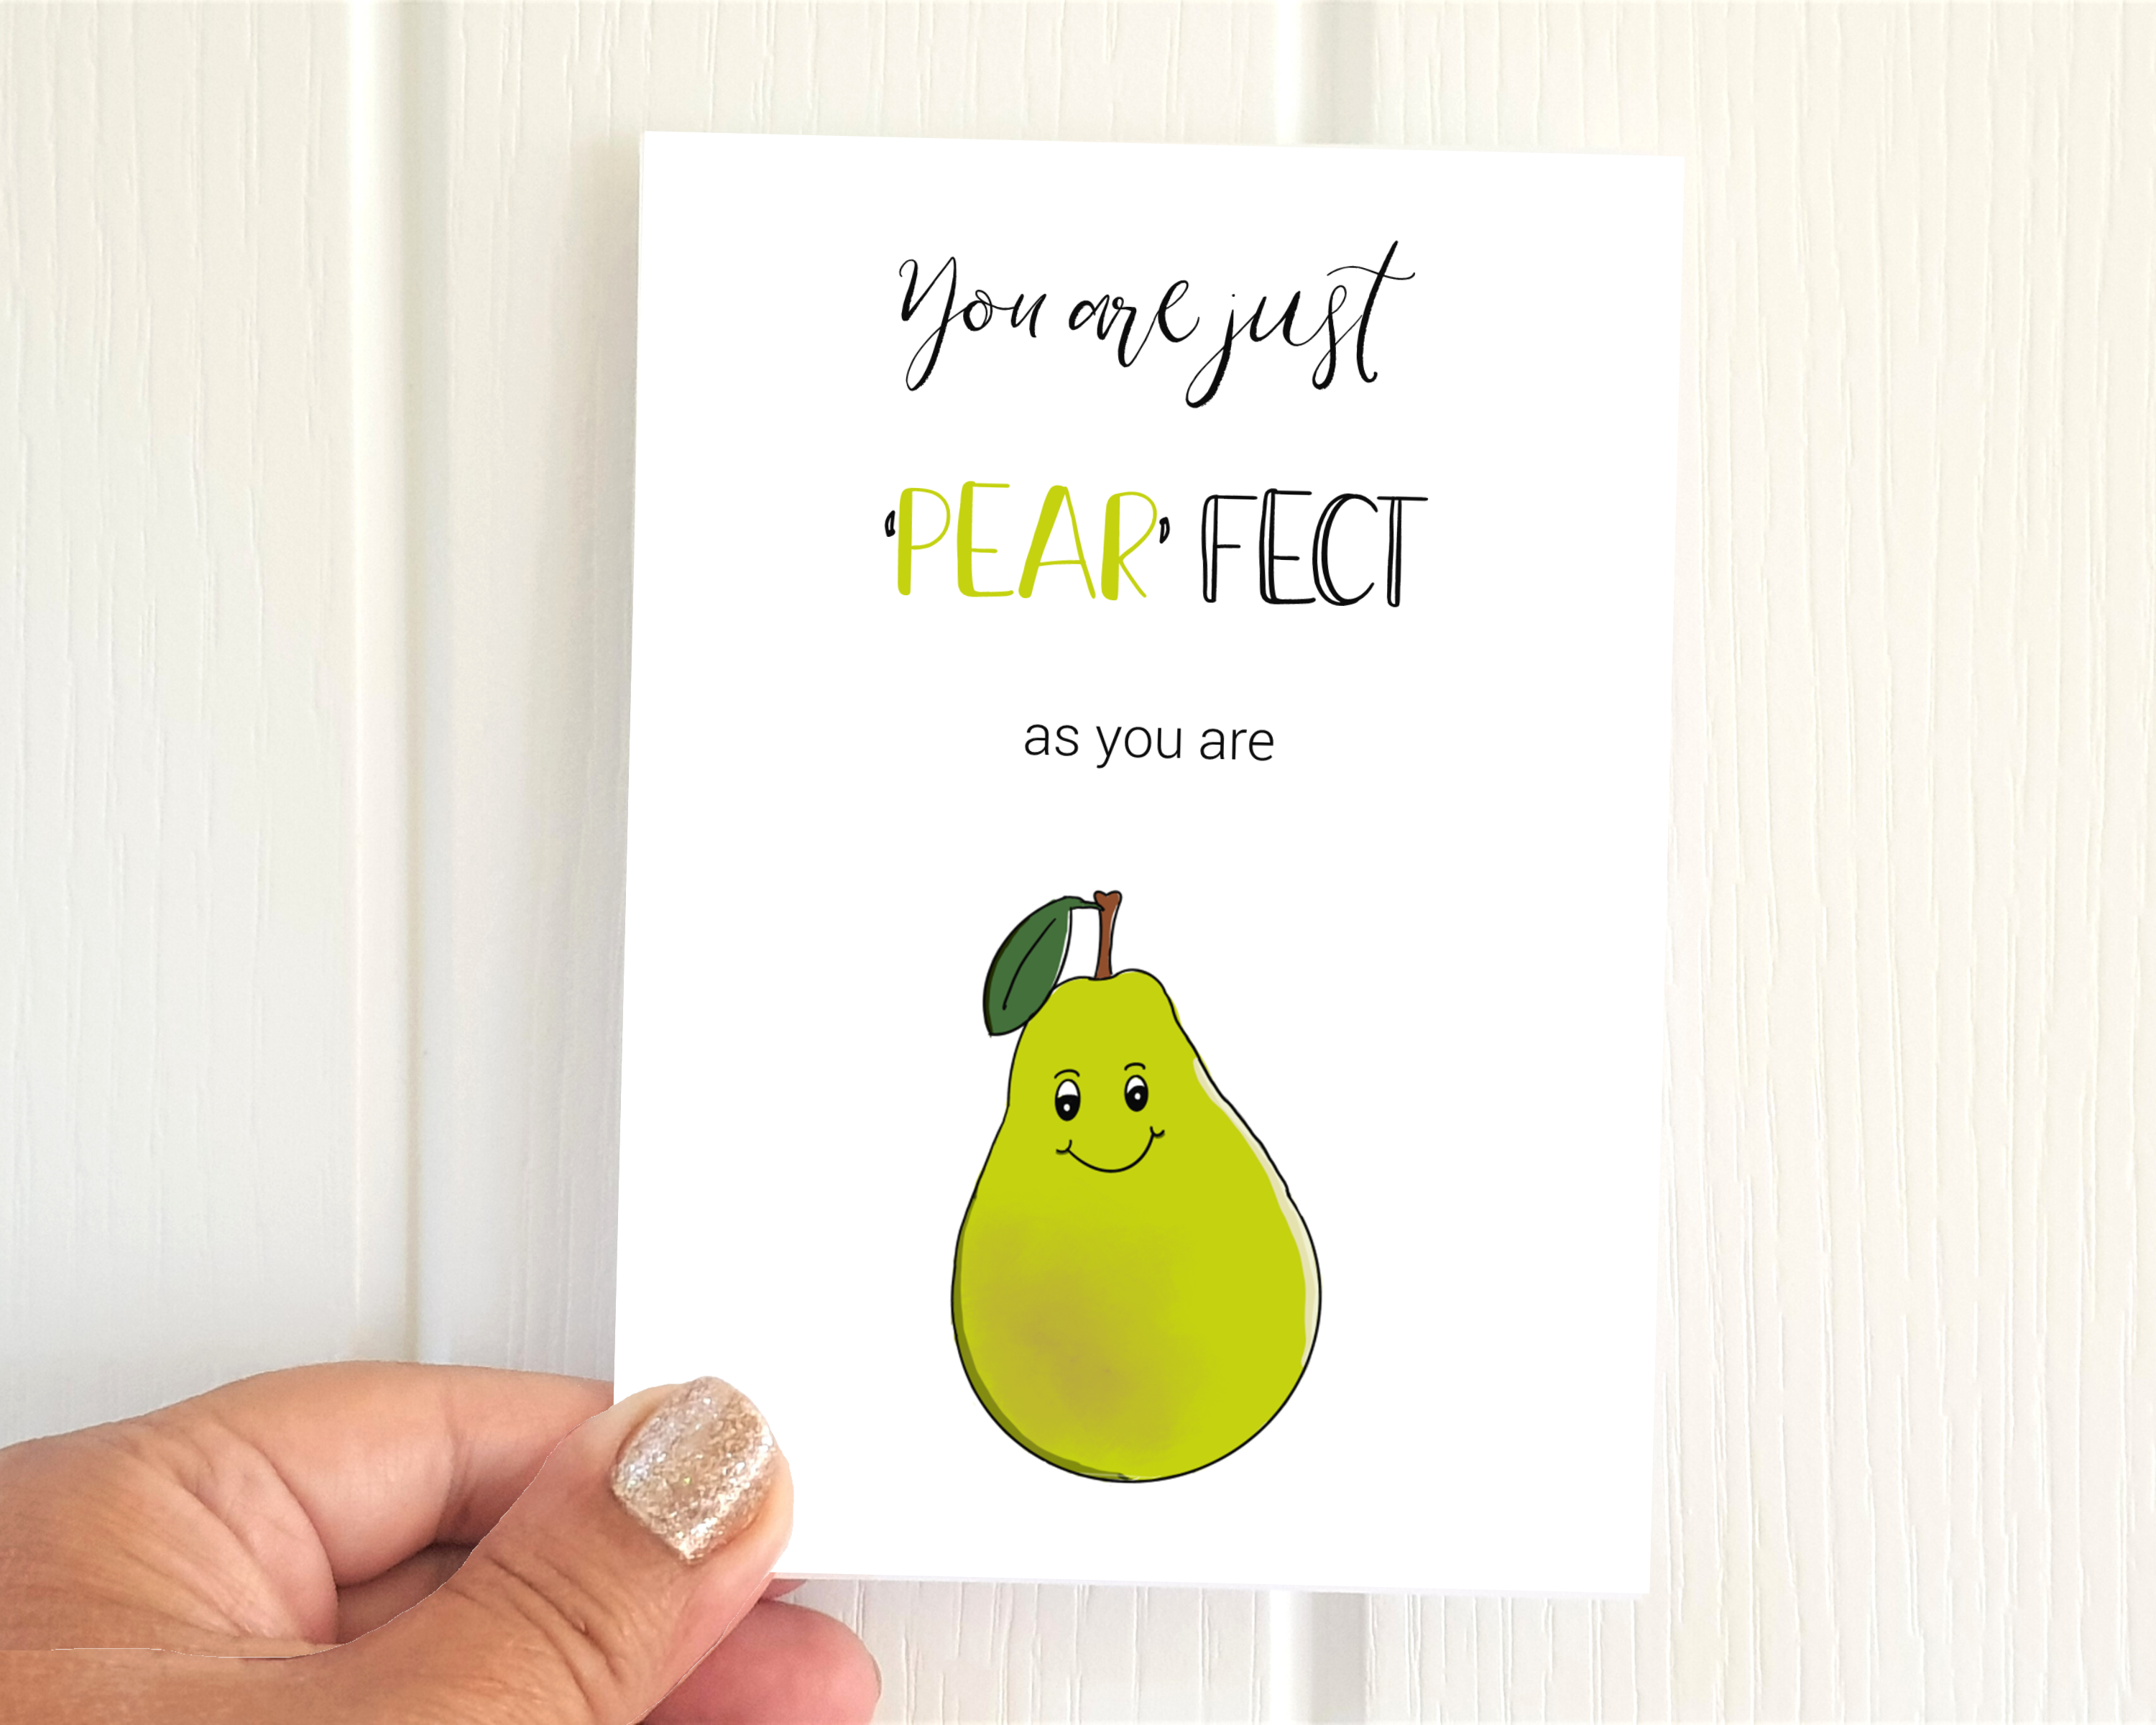 Poppleberry A6 'Just 'Pear' fect' positivity postcard, with a green pear illustration & pun, on white cardstock.